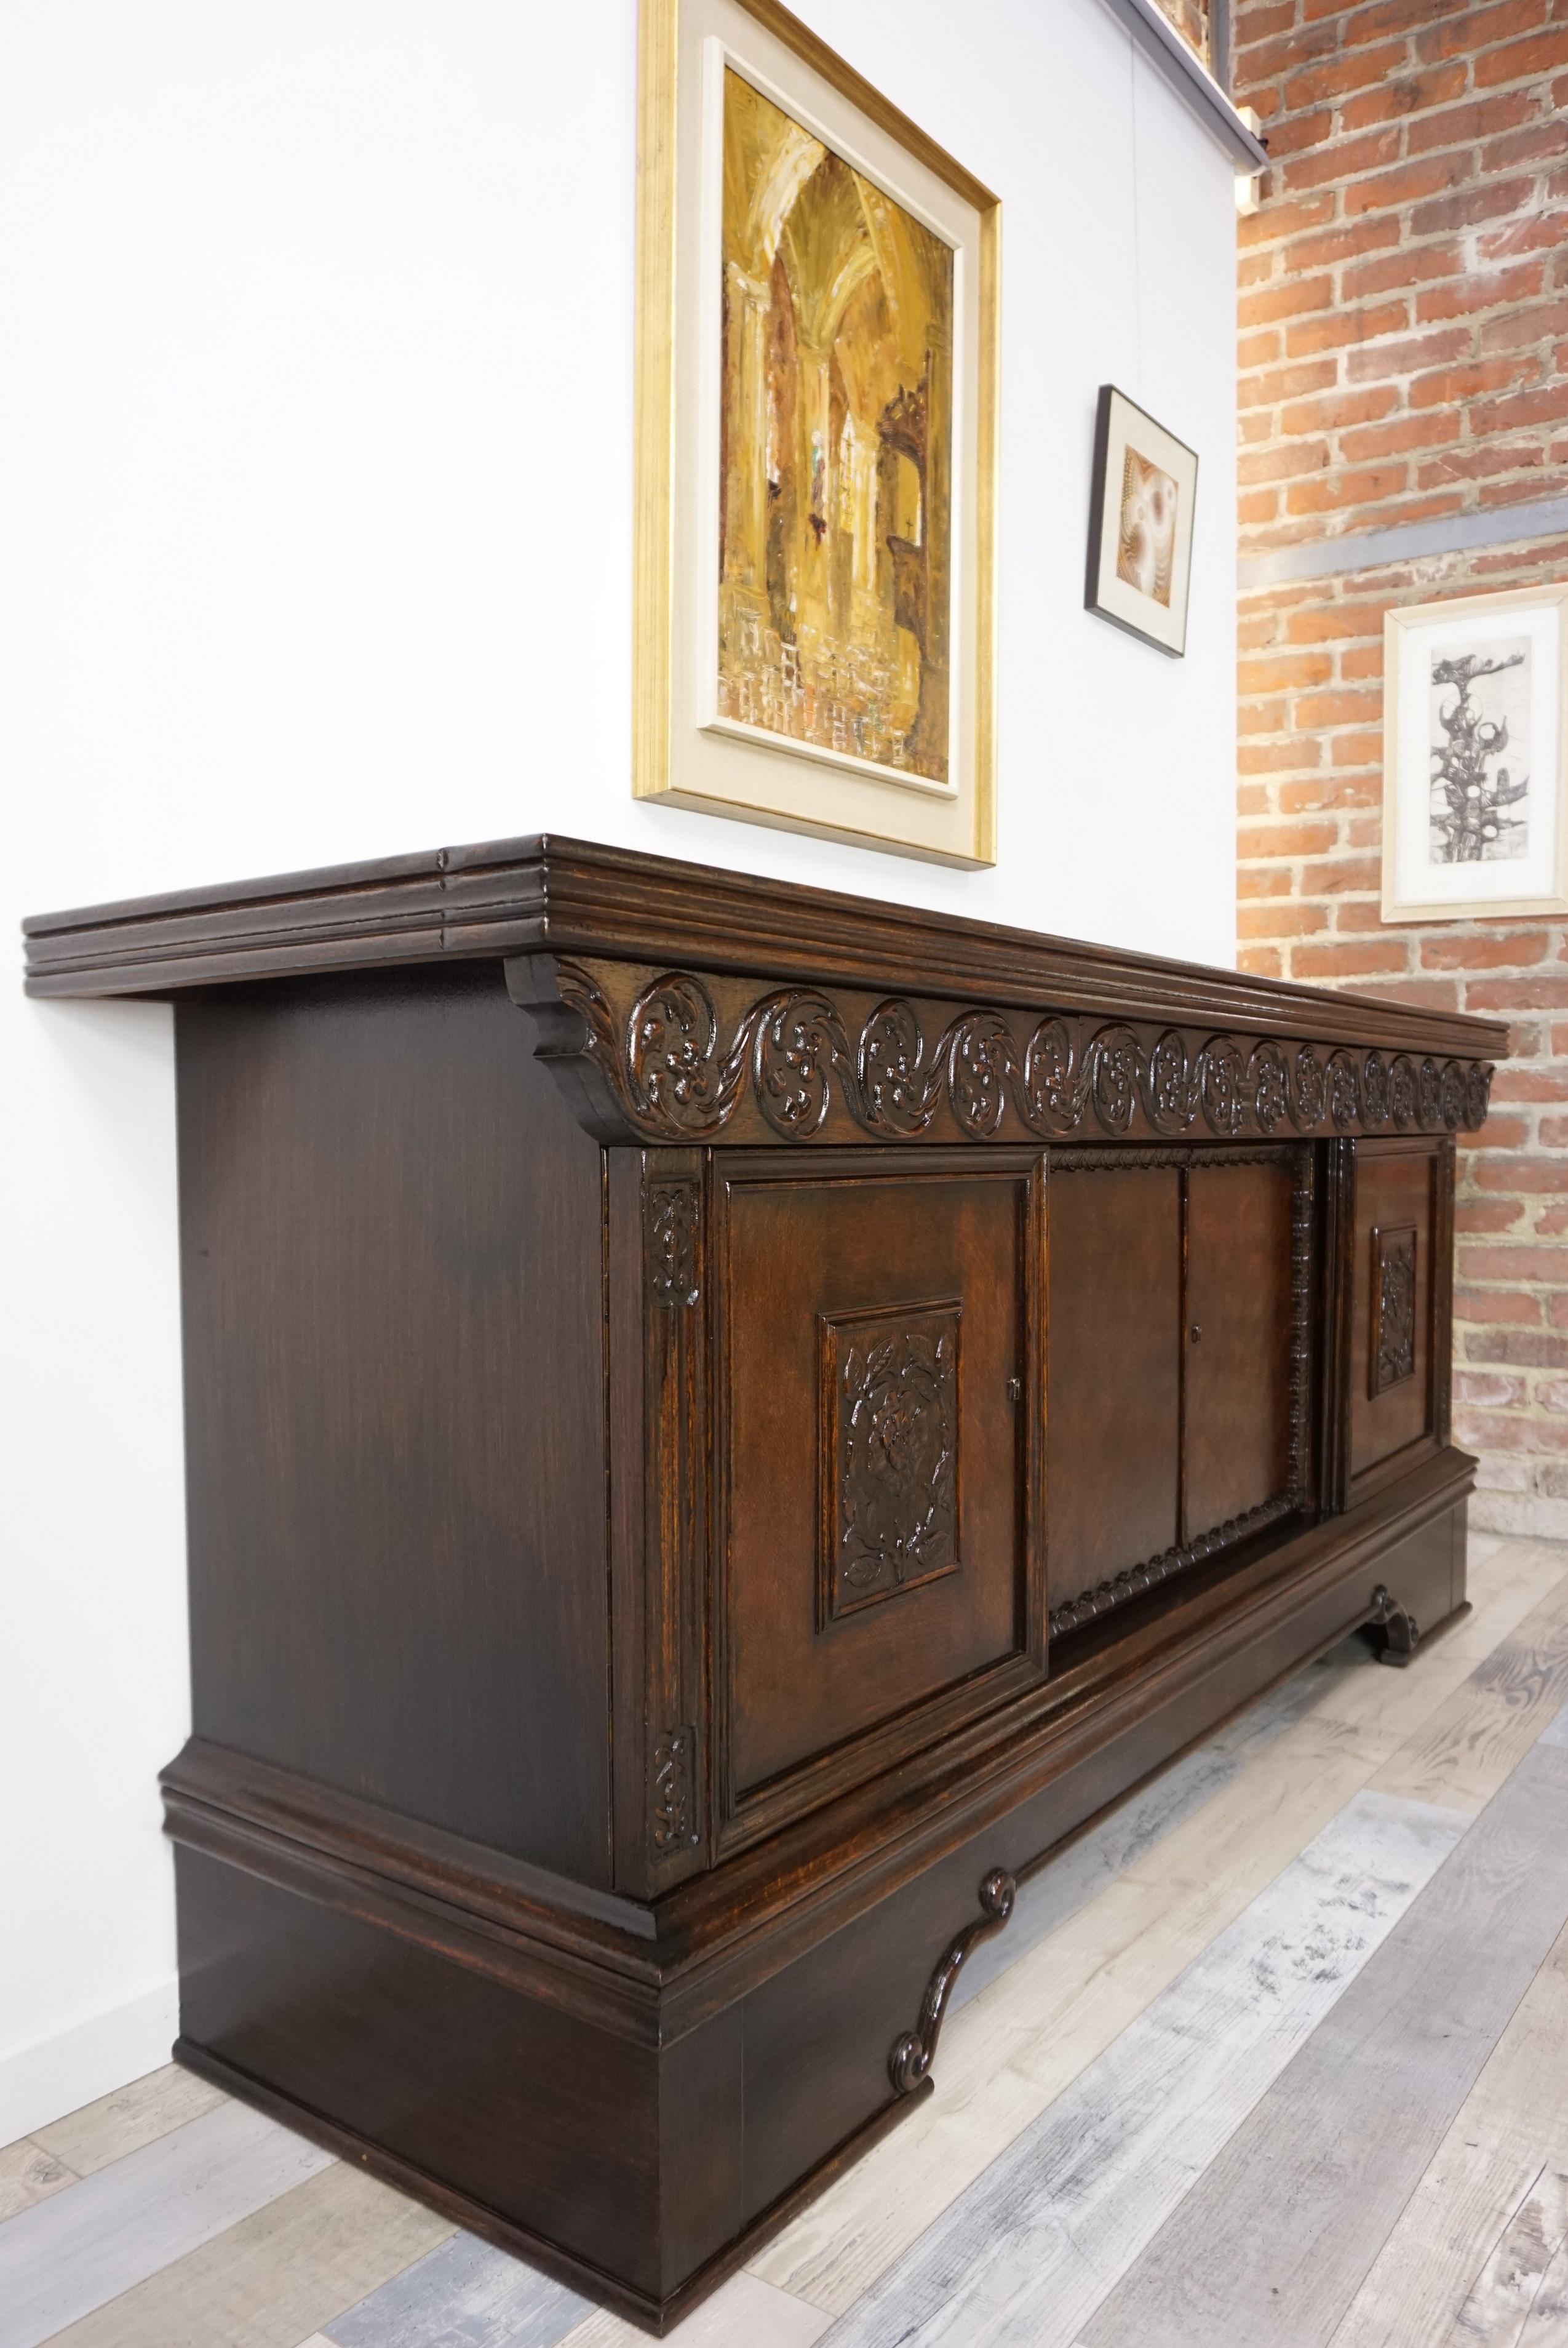 Antique Sideboard or Oak Wooden Buffet, 19th-Early 20th Century For Sale 7